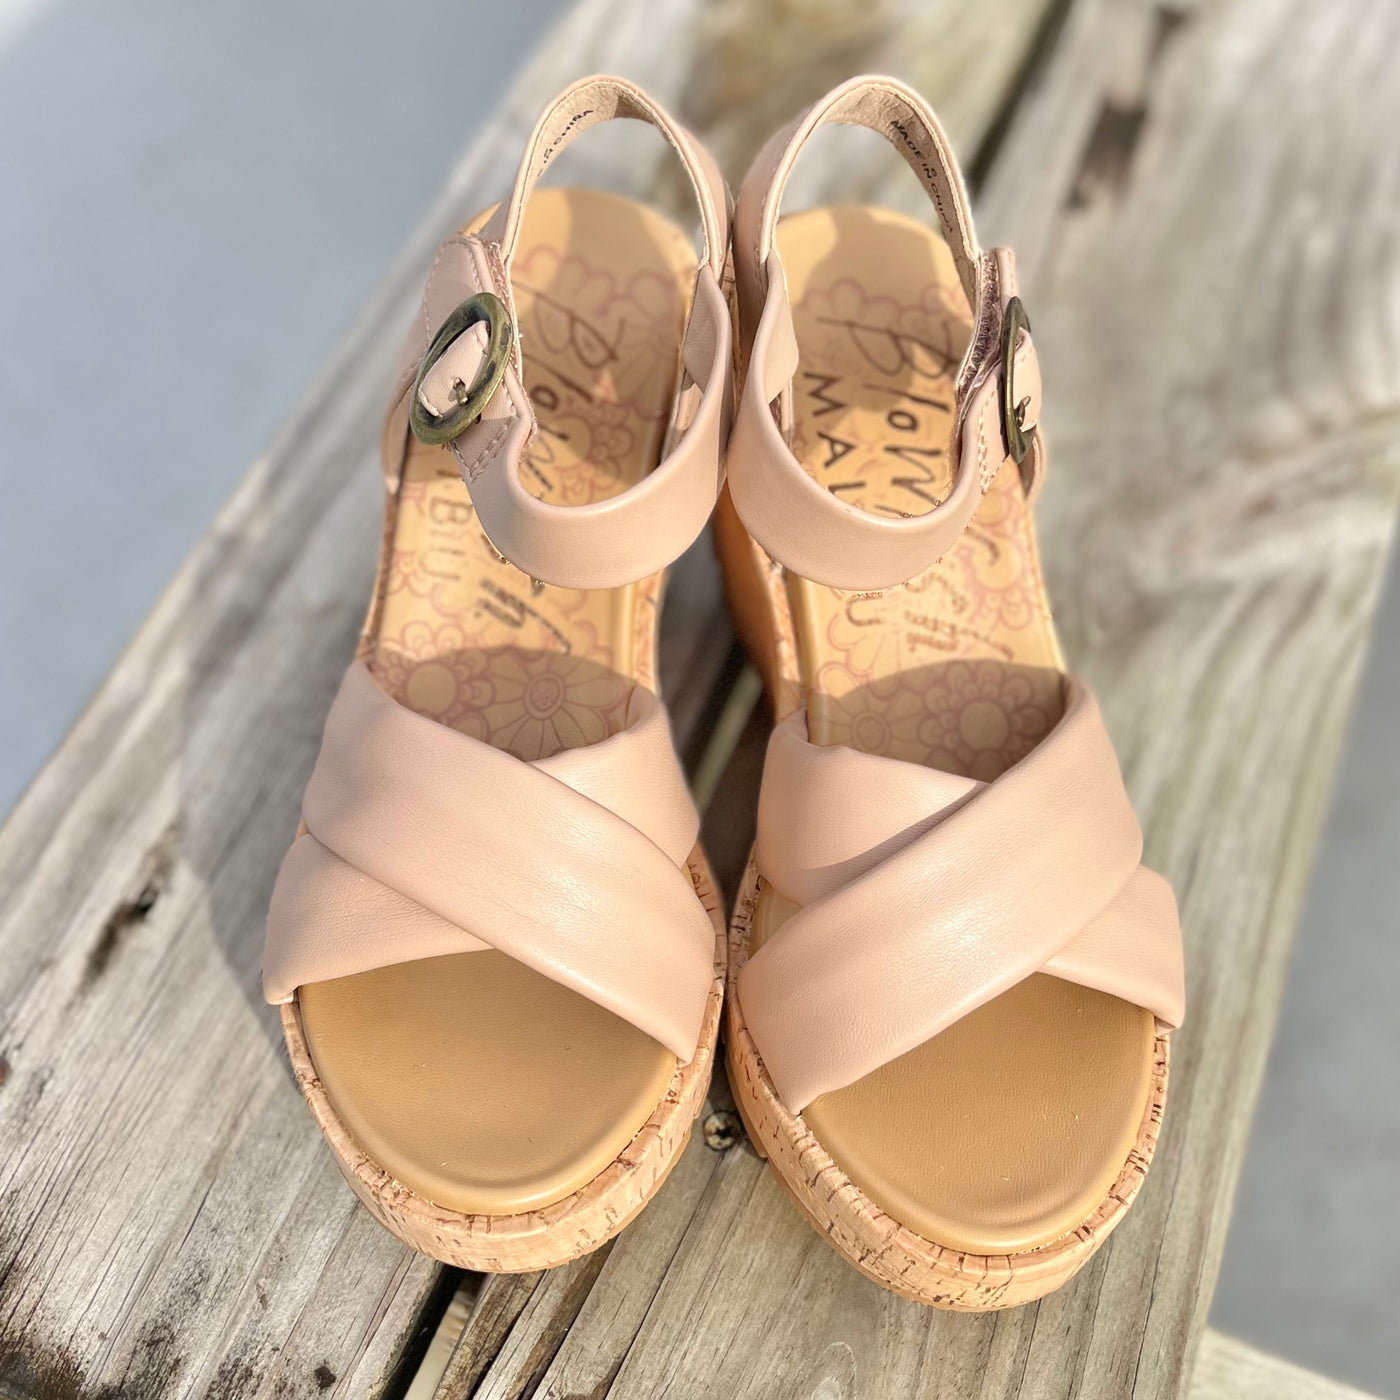 Barbados Wedge by Blowfish in Cashew